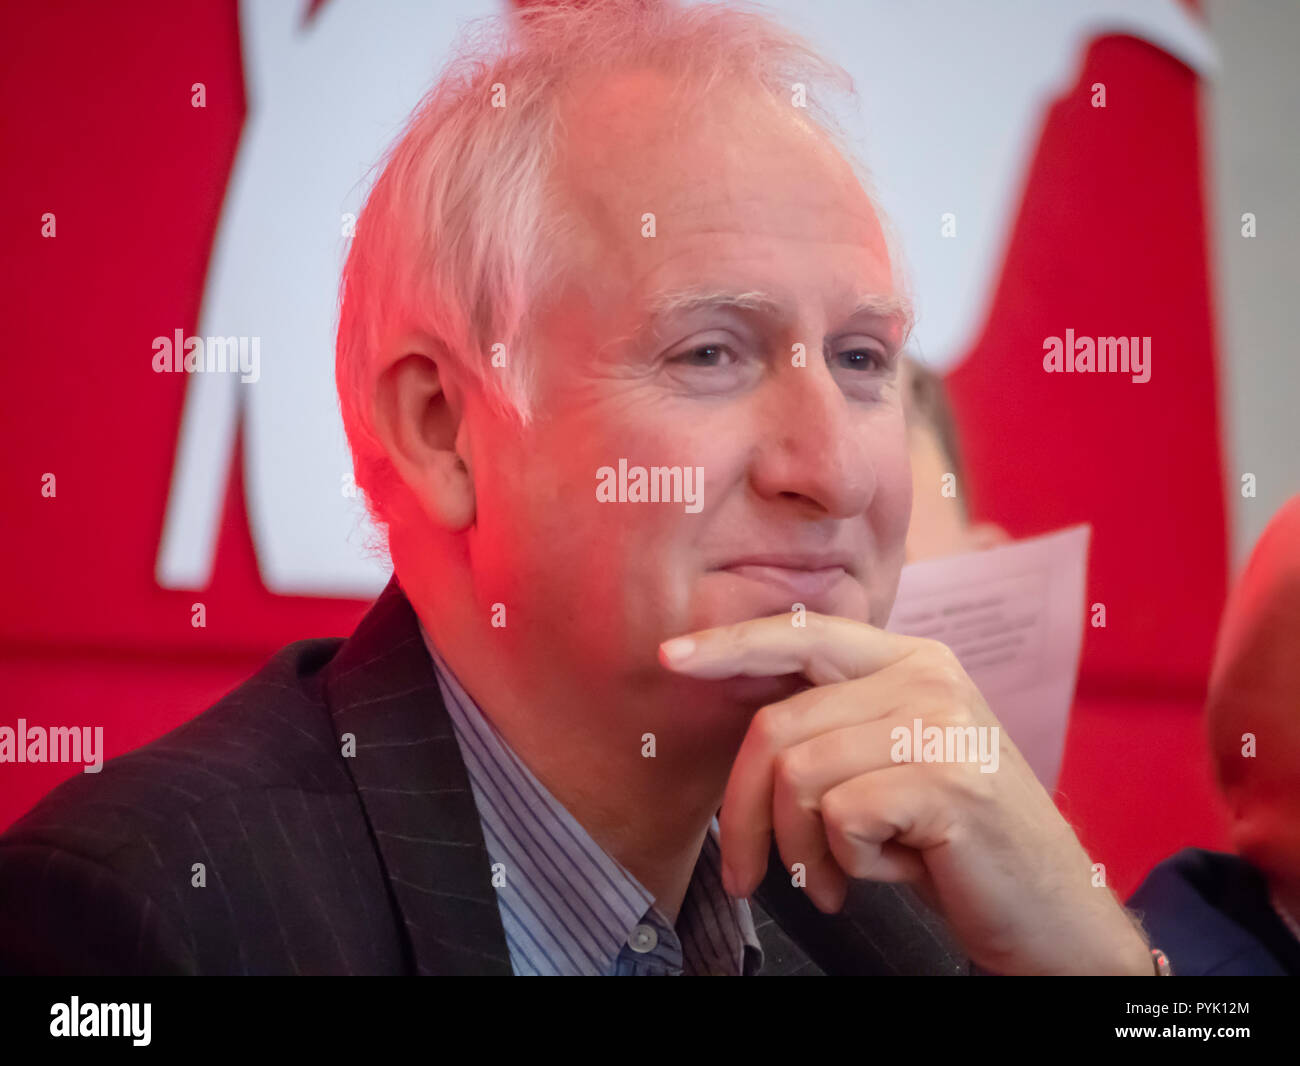 Norwich, UK. 28th October 2018 Daniel Zeichner MP waits to speak to the Labour Regional Conference in Norwich Norfolk UK Credit: William Edwards/Alamy Live News Stock Photo